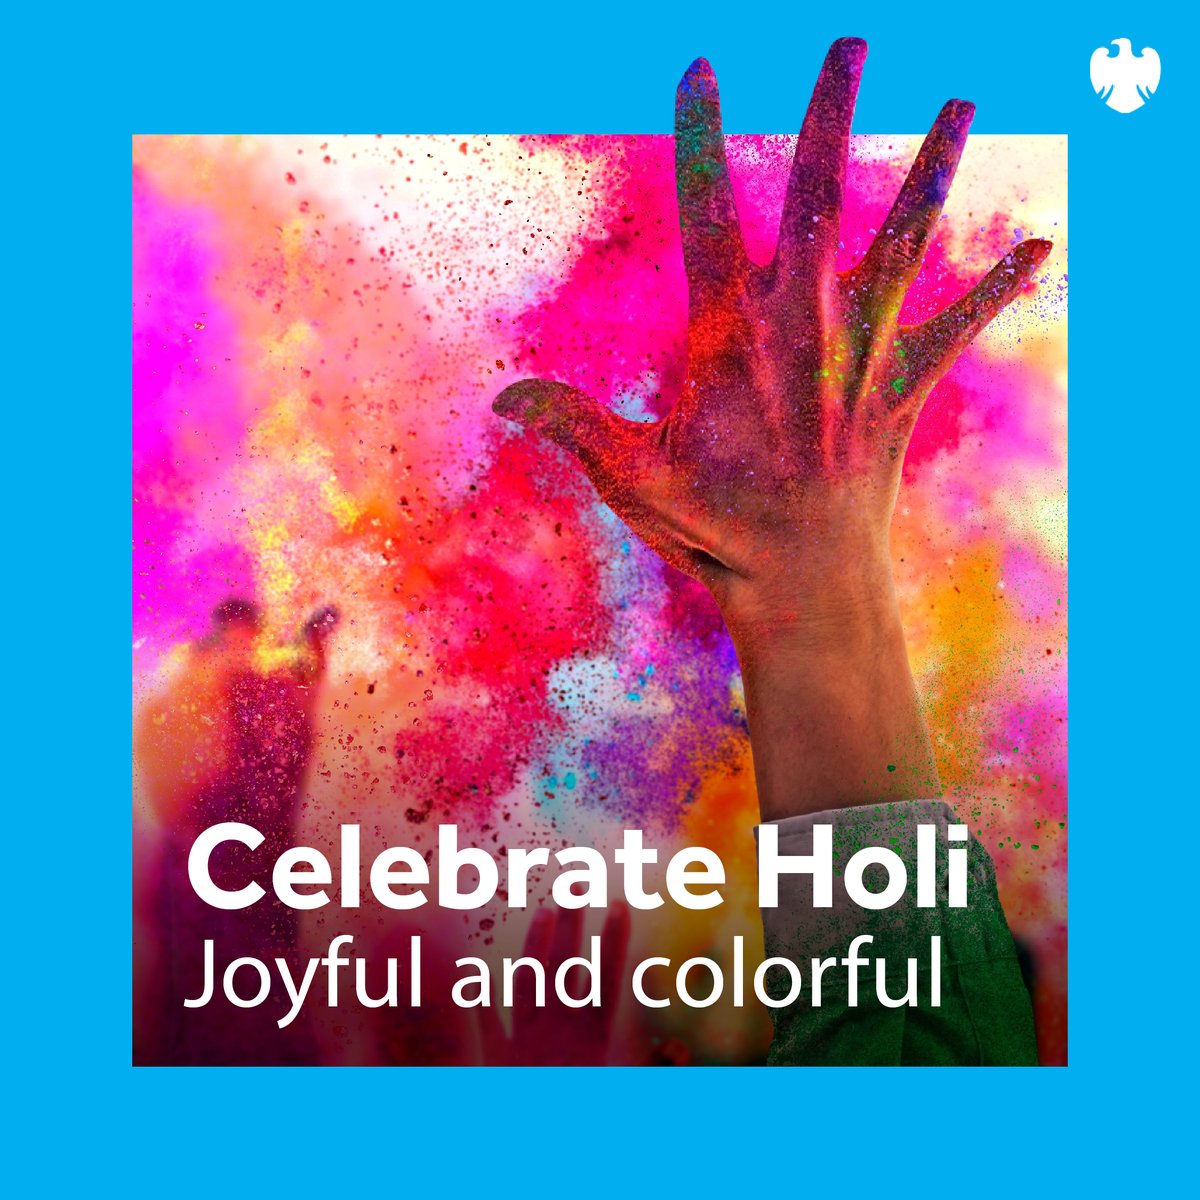 Happy Holi. Holi is the festival of color, laughter, and unity. Celebrate with a splash of joy, peace, and the triumph of good over evil. This is a time to create colorful memories and enjoy the company of friends and family.